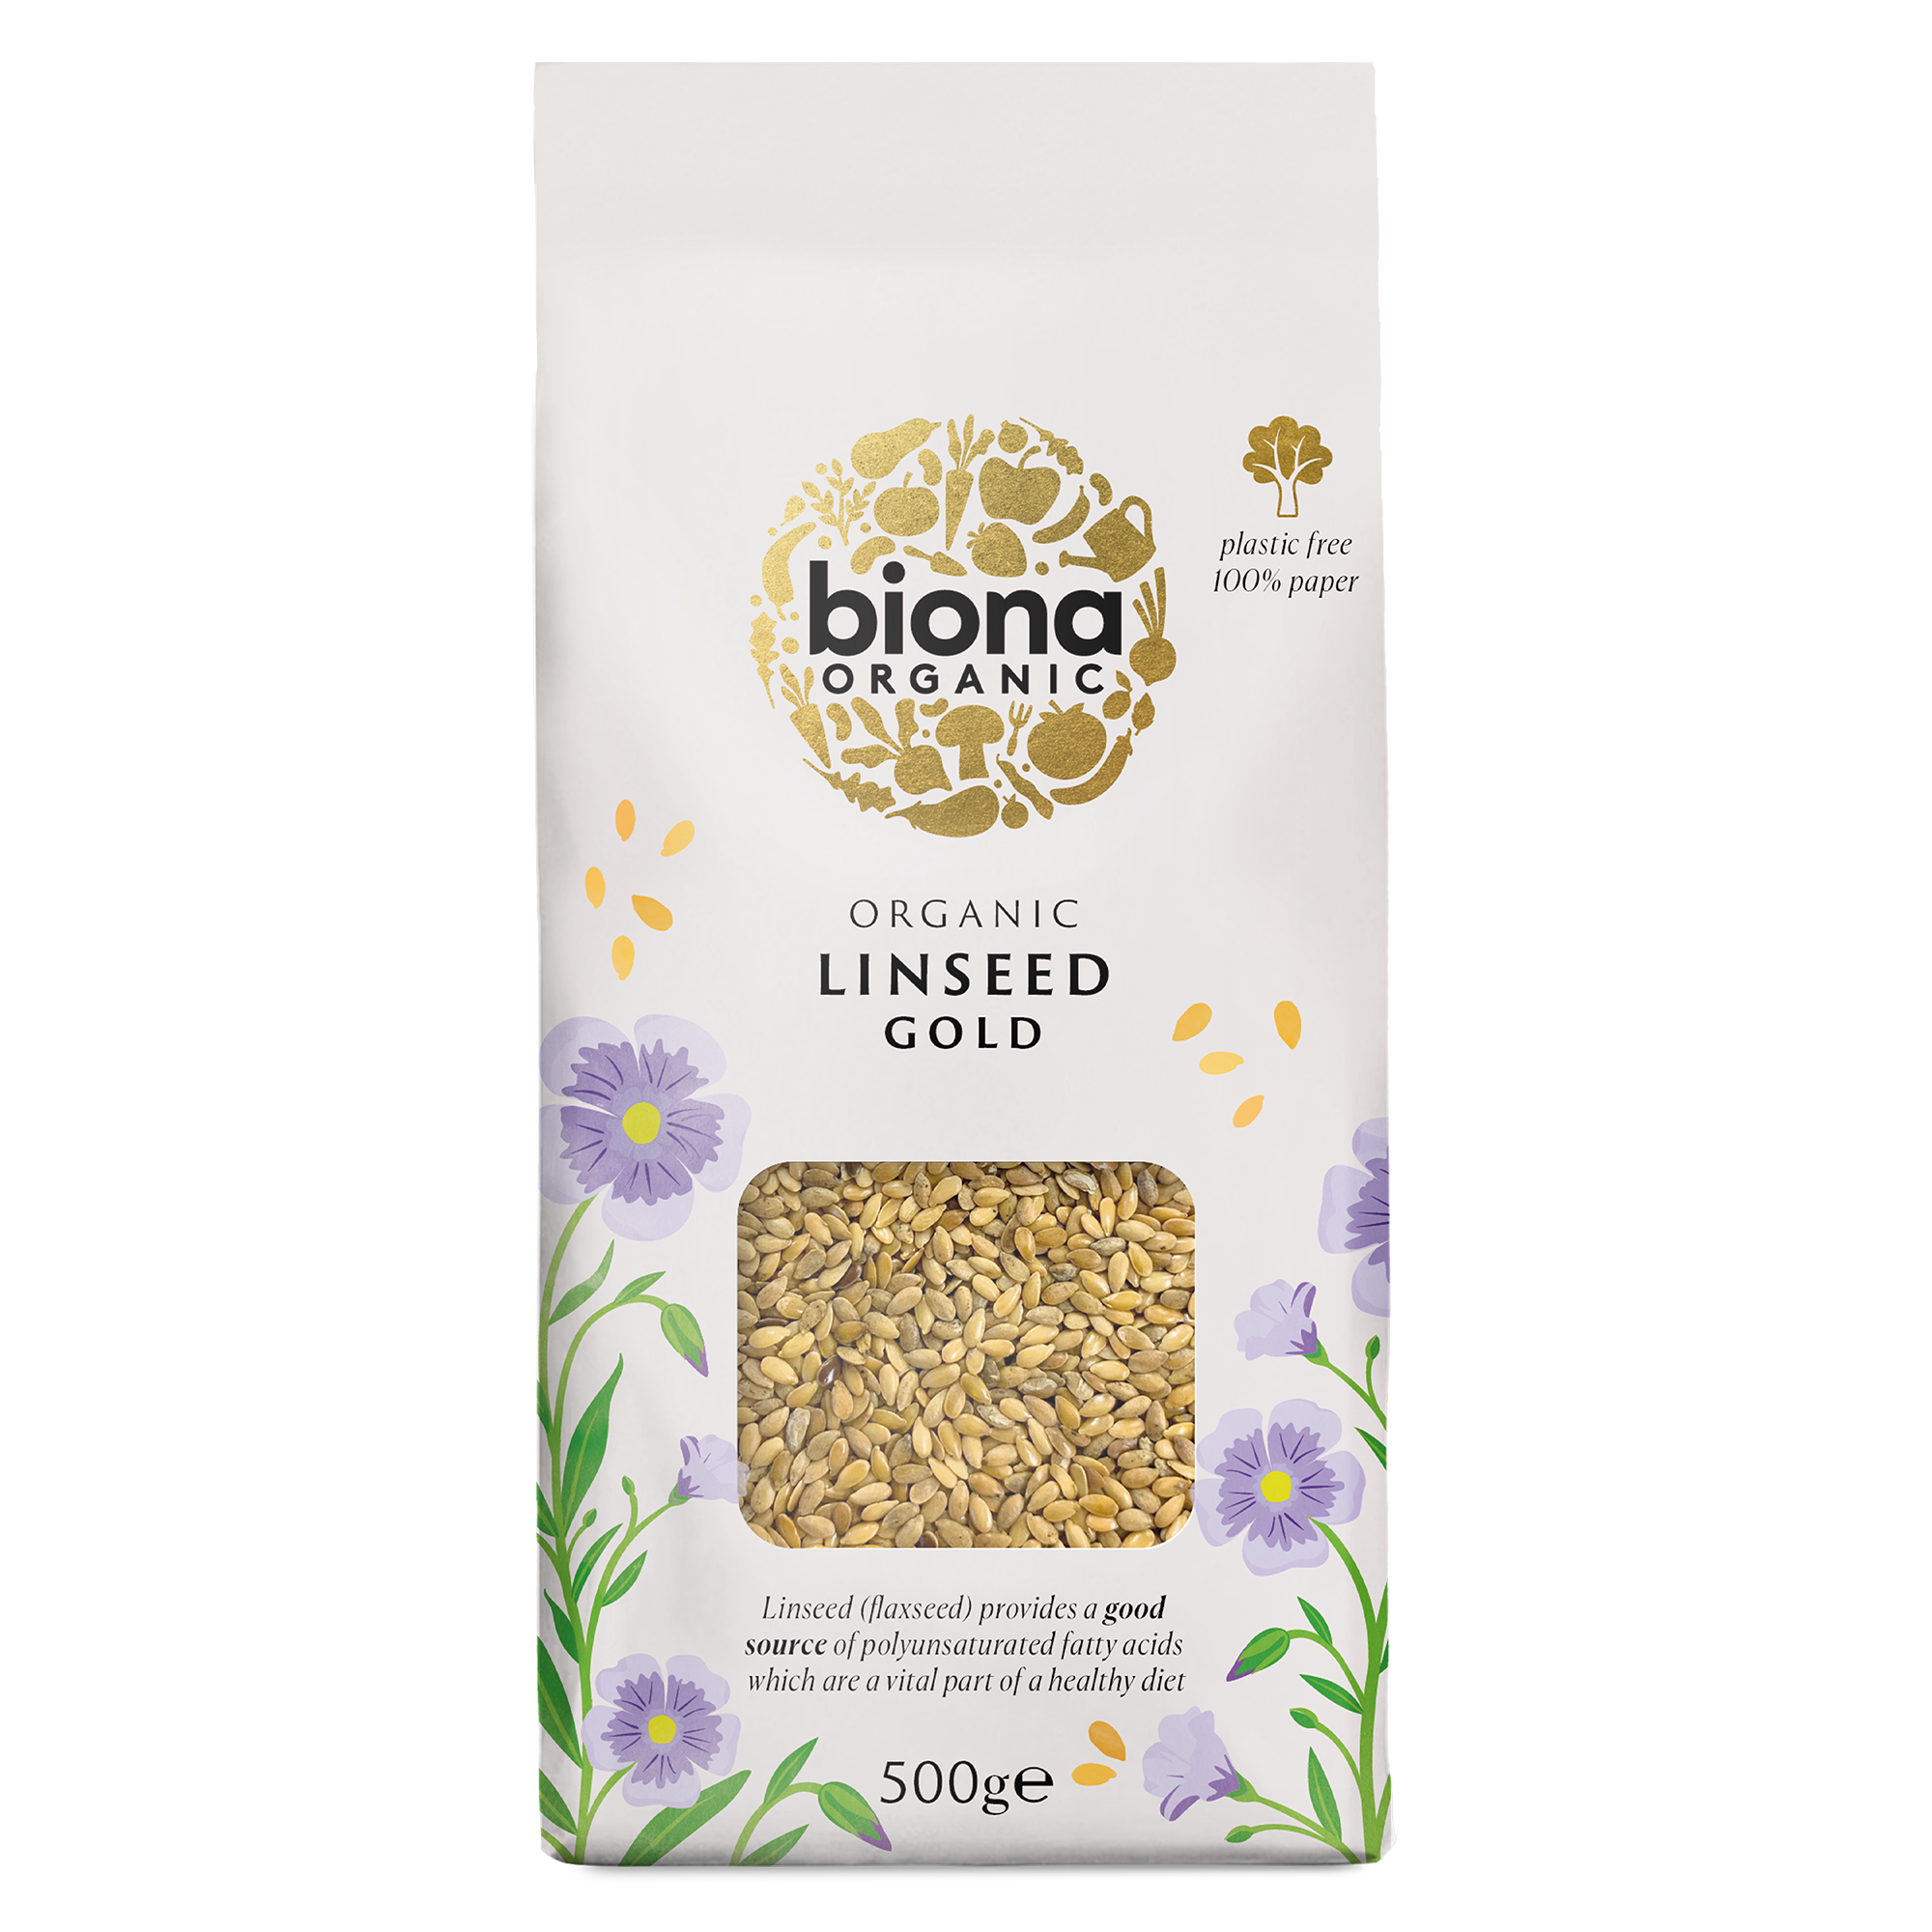 LINSEED GOLD